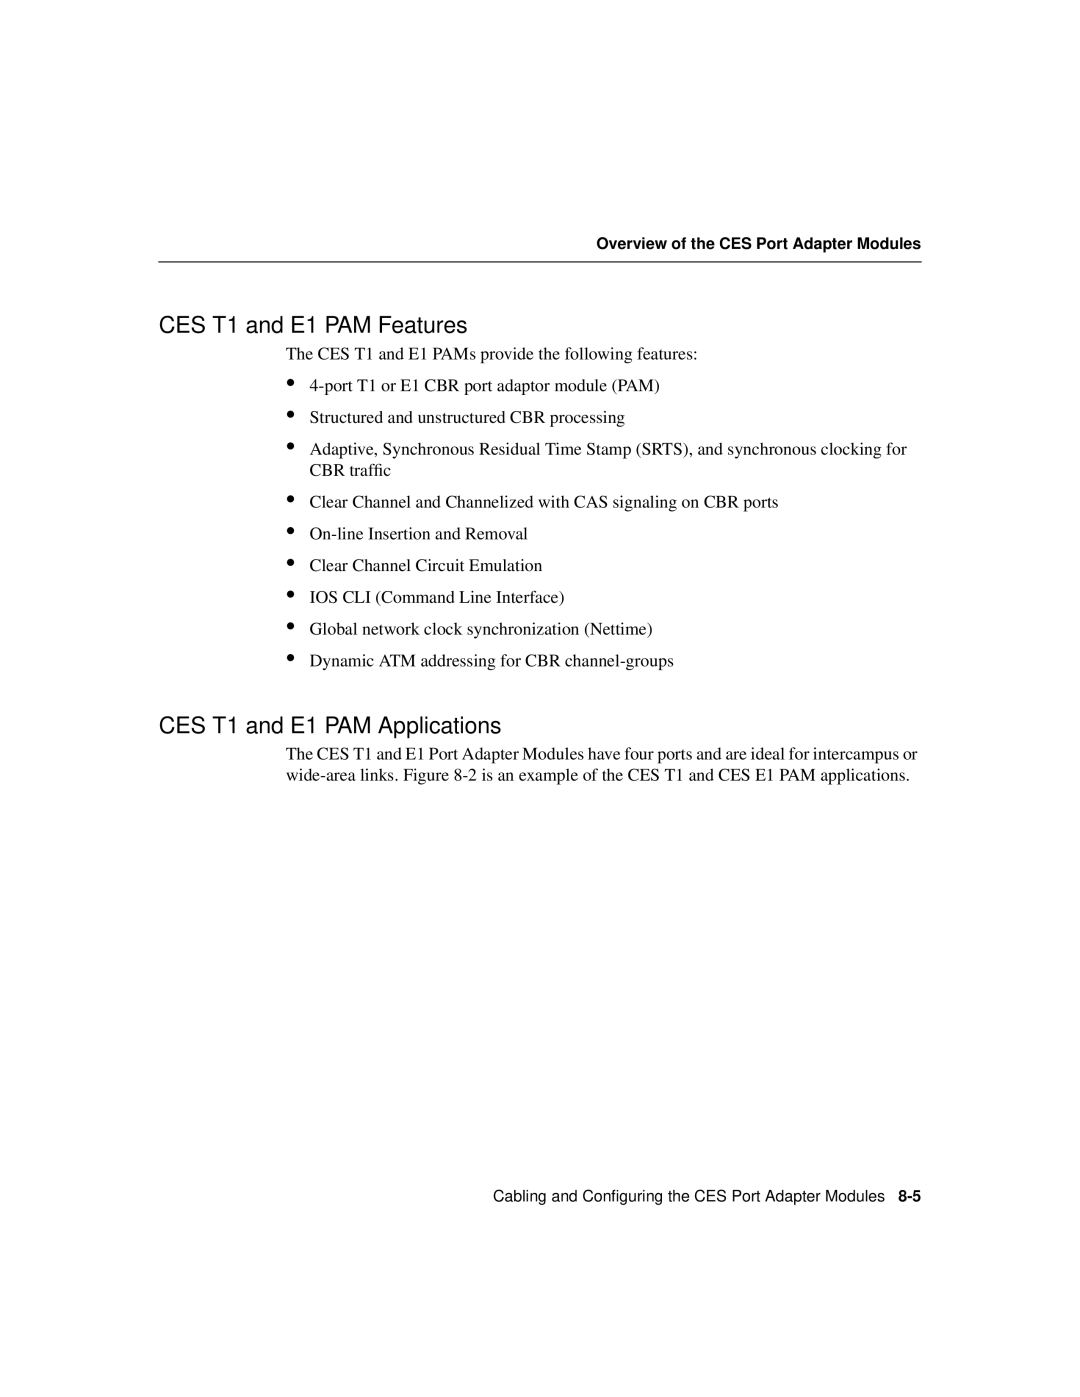 Cisco Systems 1010 manual CES T1 and E1 PAM Features, CES T1 and E1 PAM Applications 